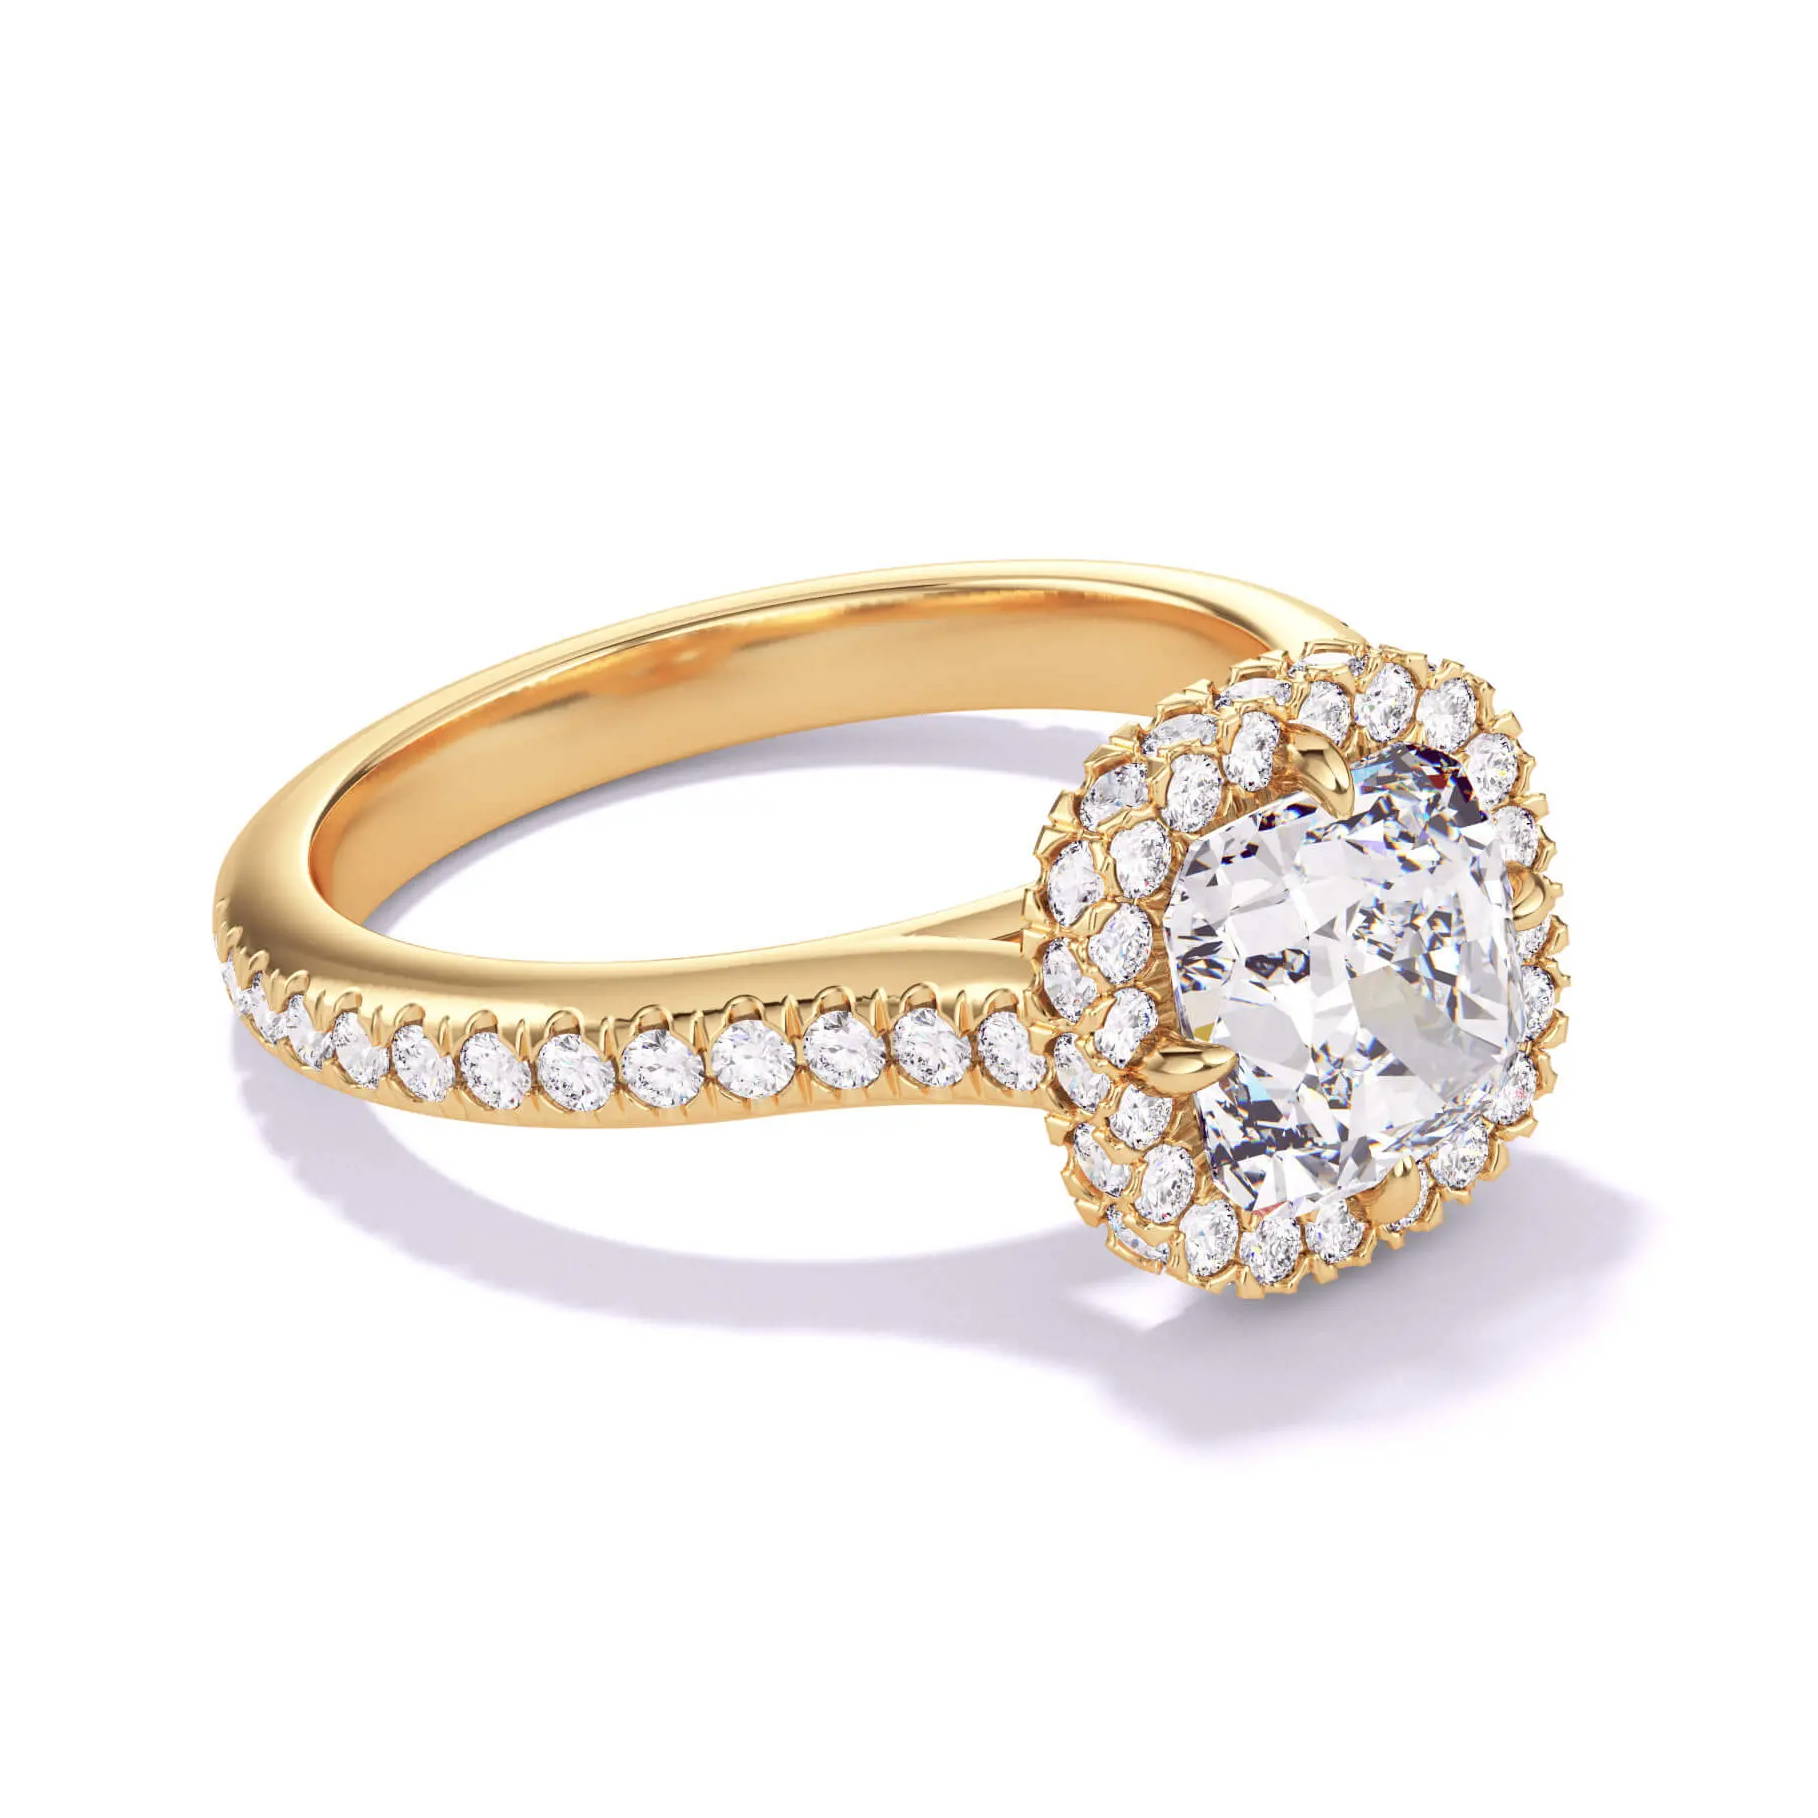 $10,000 diamond engagement ring  - cushion with a wrapped halo on a single row pave band